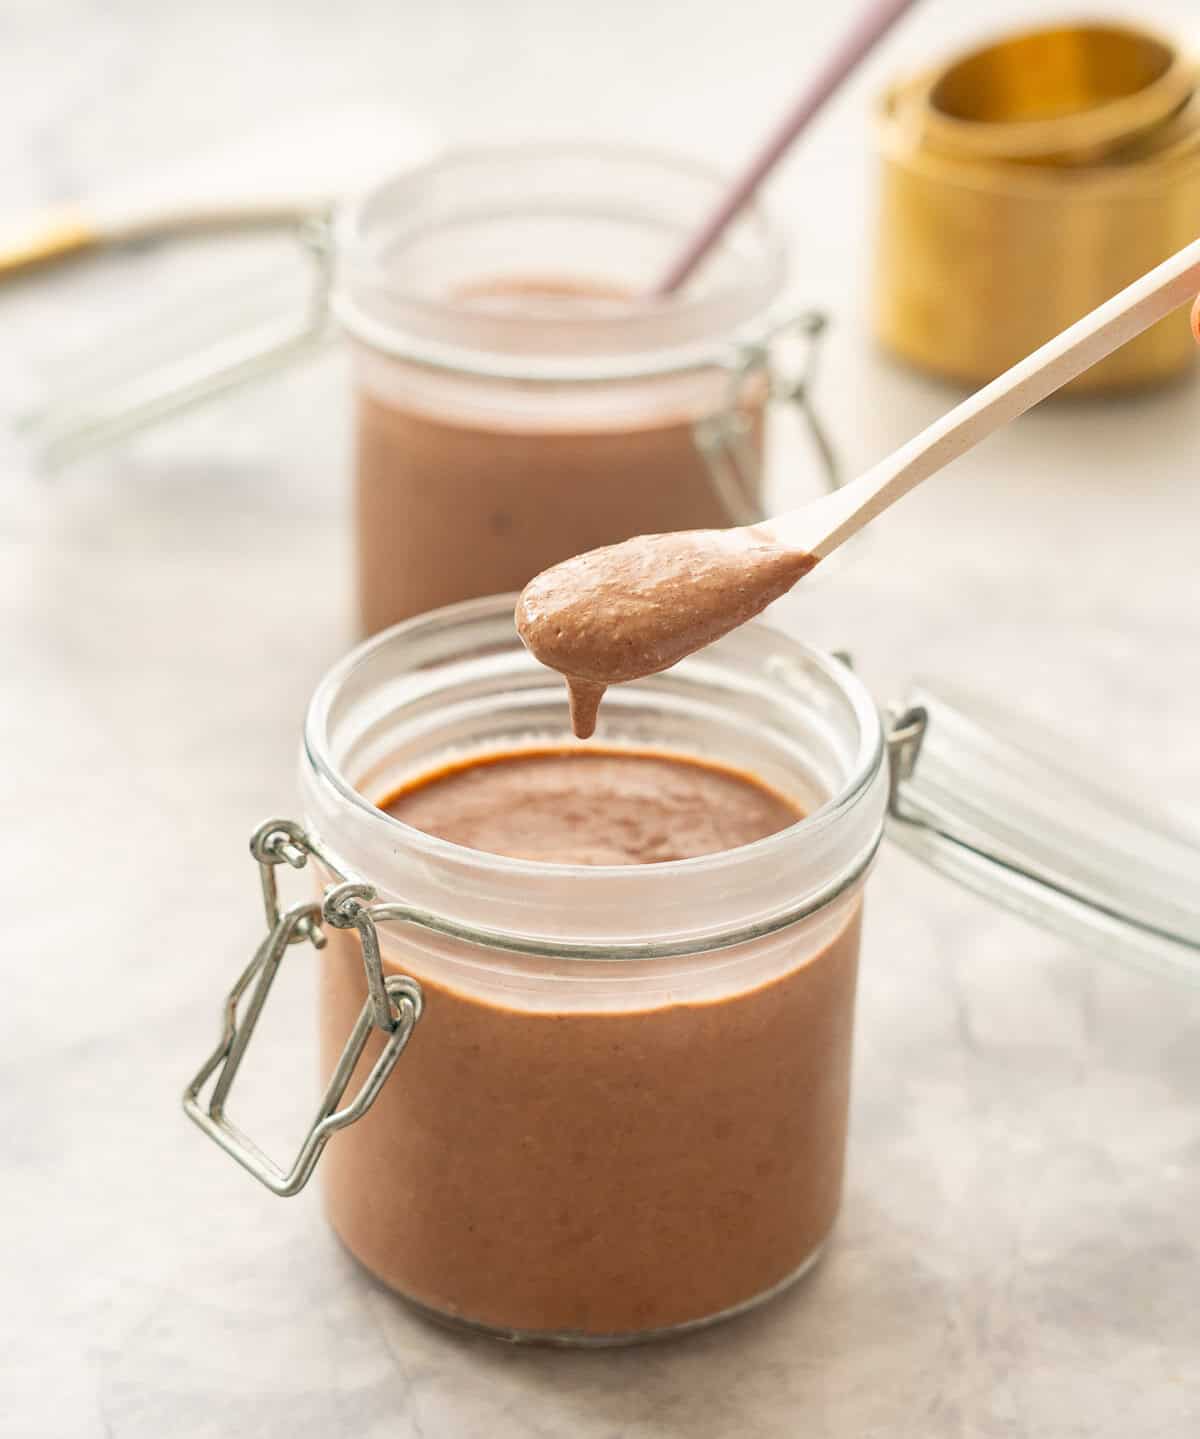 A spoonful of chocolate pudding being scoped from a small glass mason jar. 